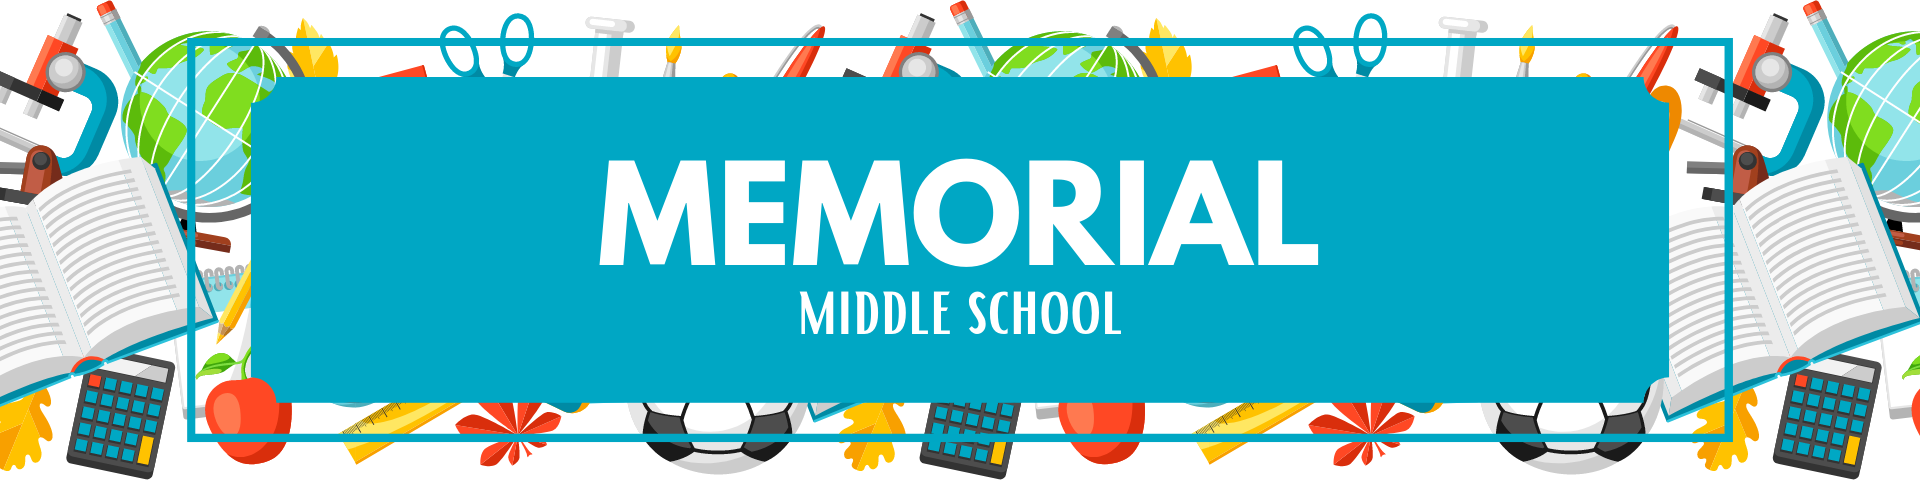 Memorial Middle